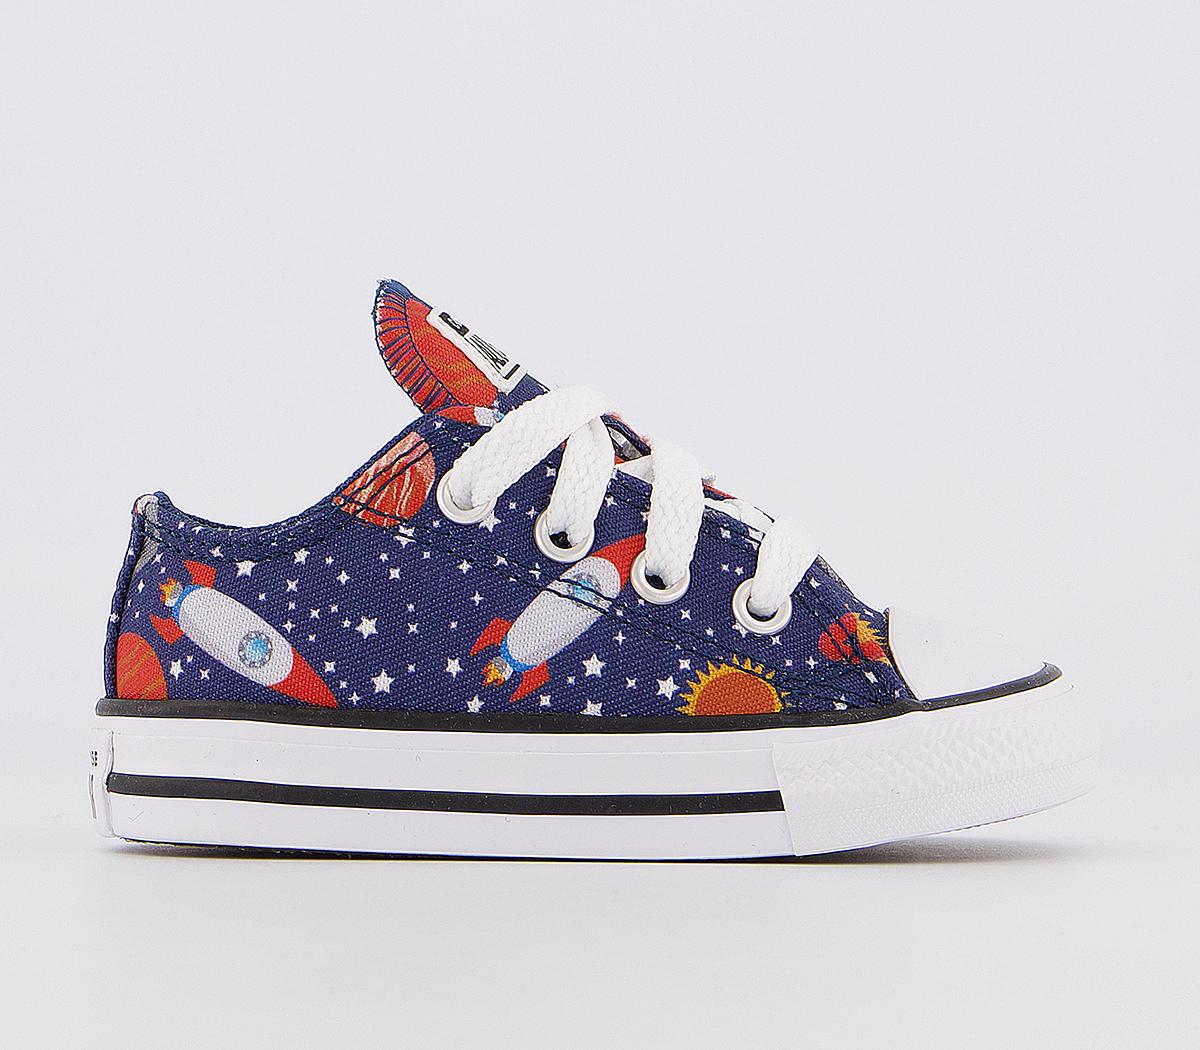 Converse Allstar Low Infant Trainers 